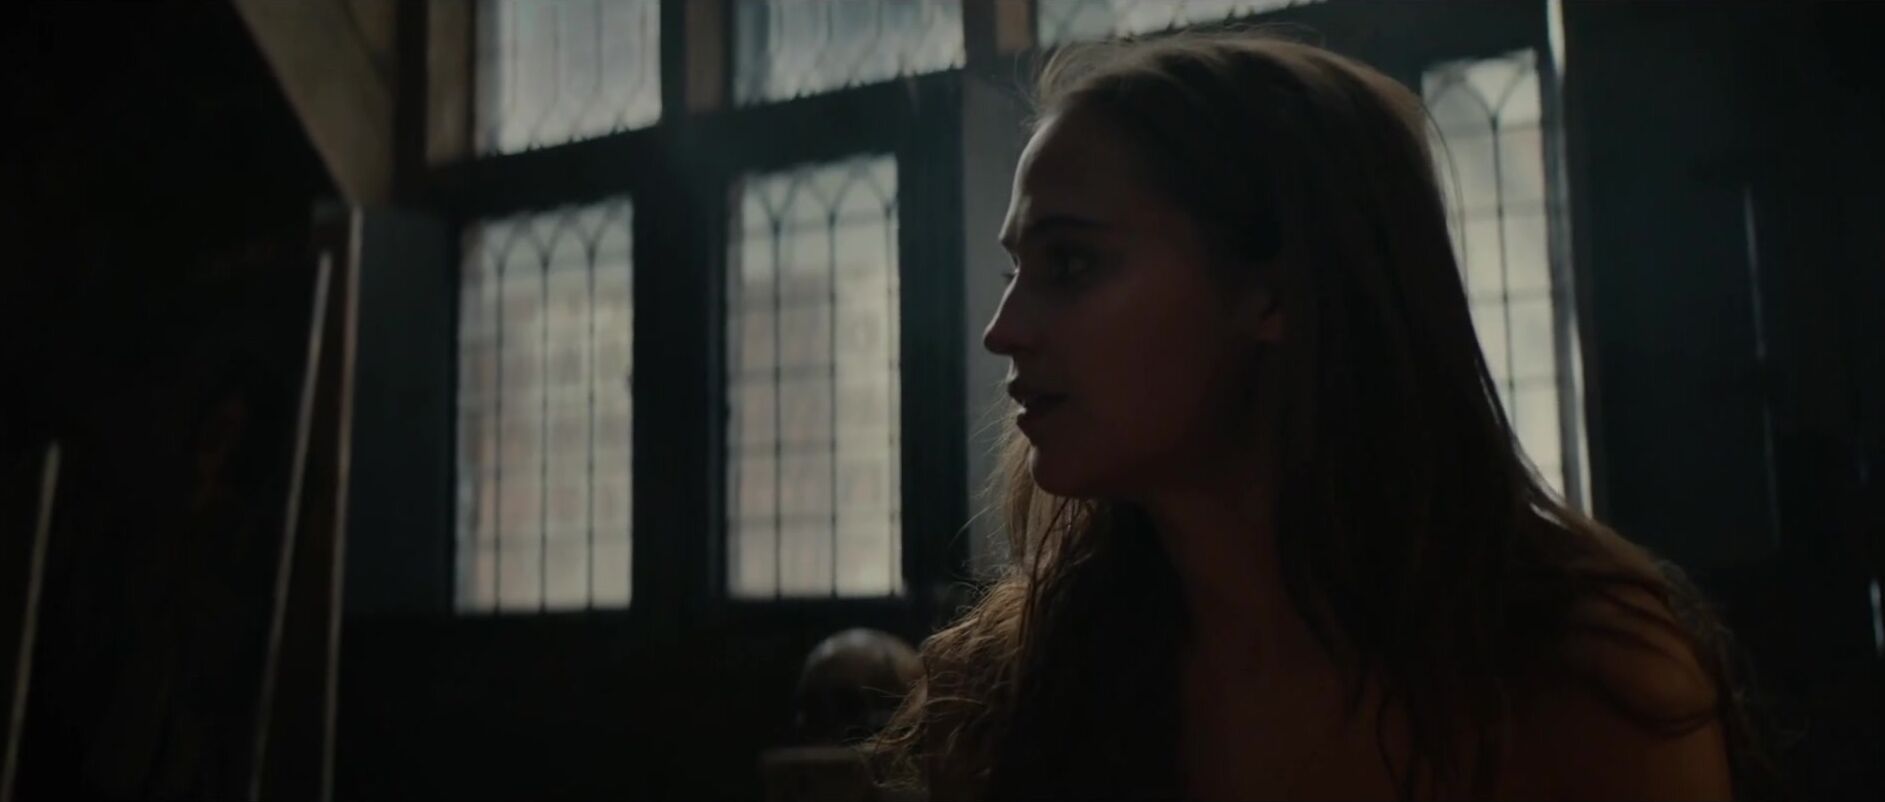 Blackmail Hot sex scenes of Alicia Vikander and other actresses being penetrated in Tulip Fever Str8 - 1